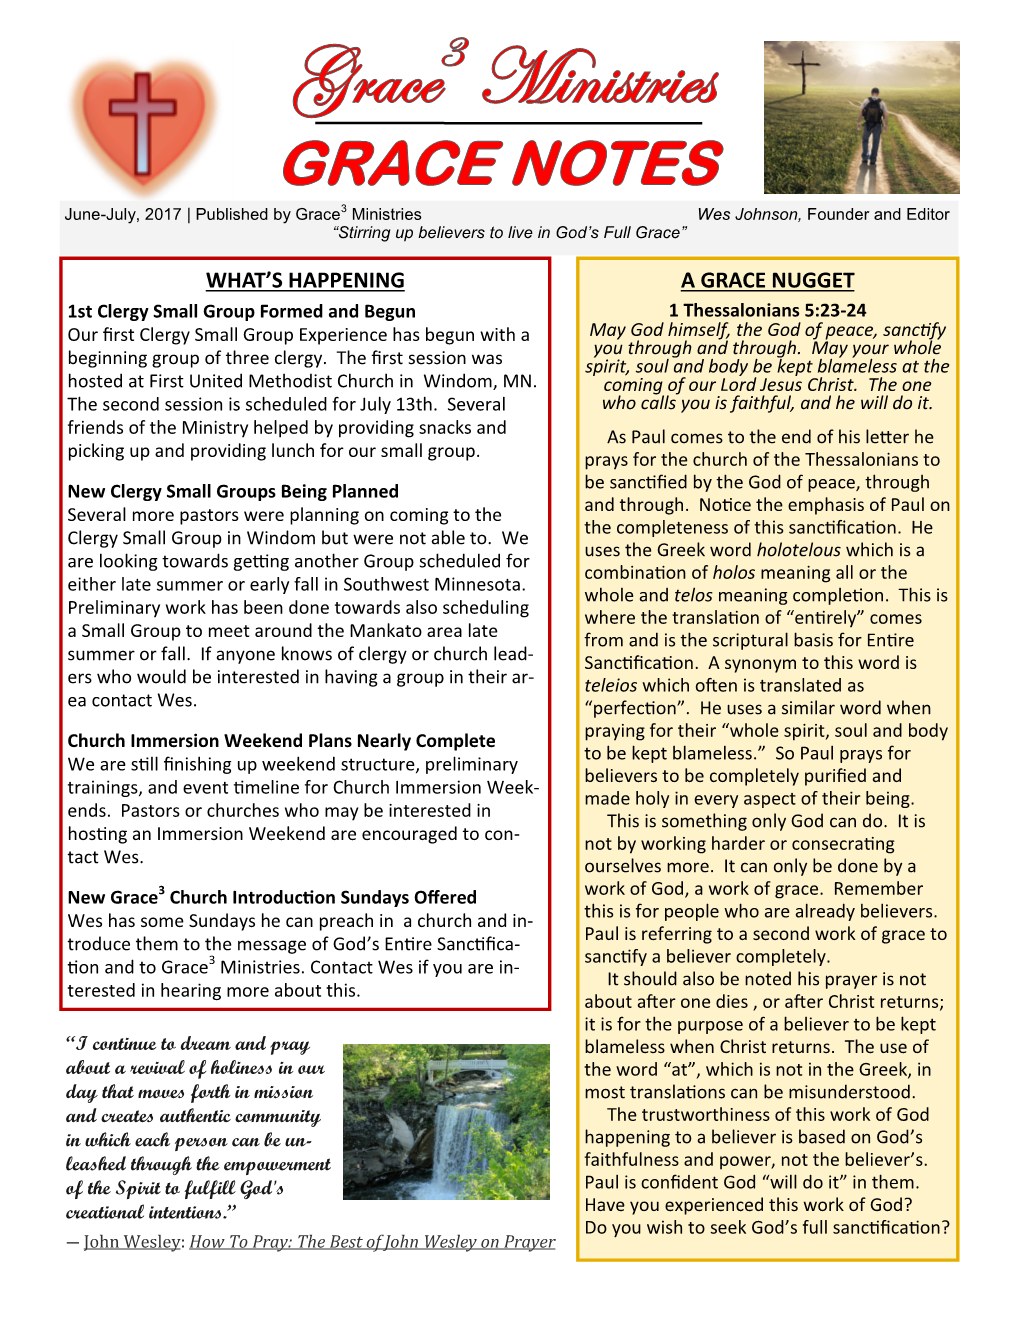 GRACE NOTES June-July 2017—Page 2